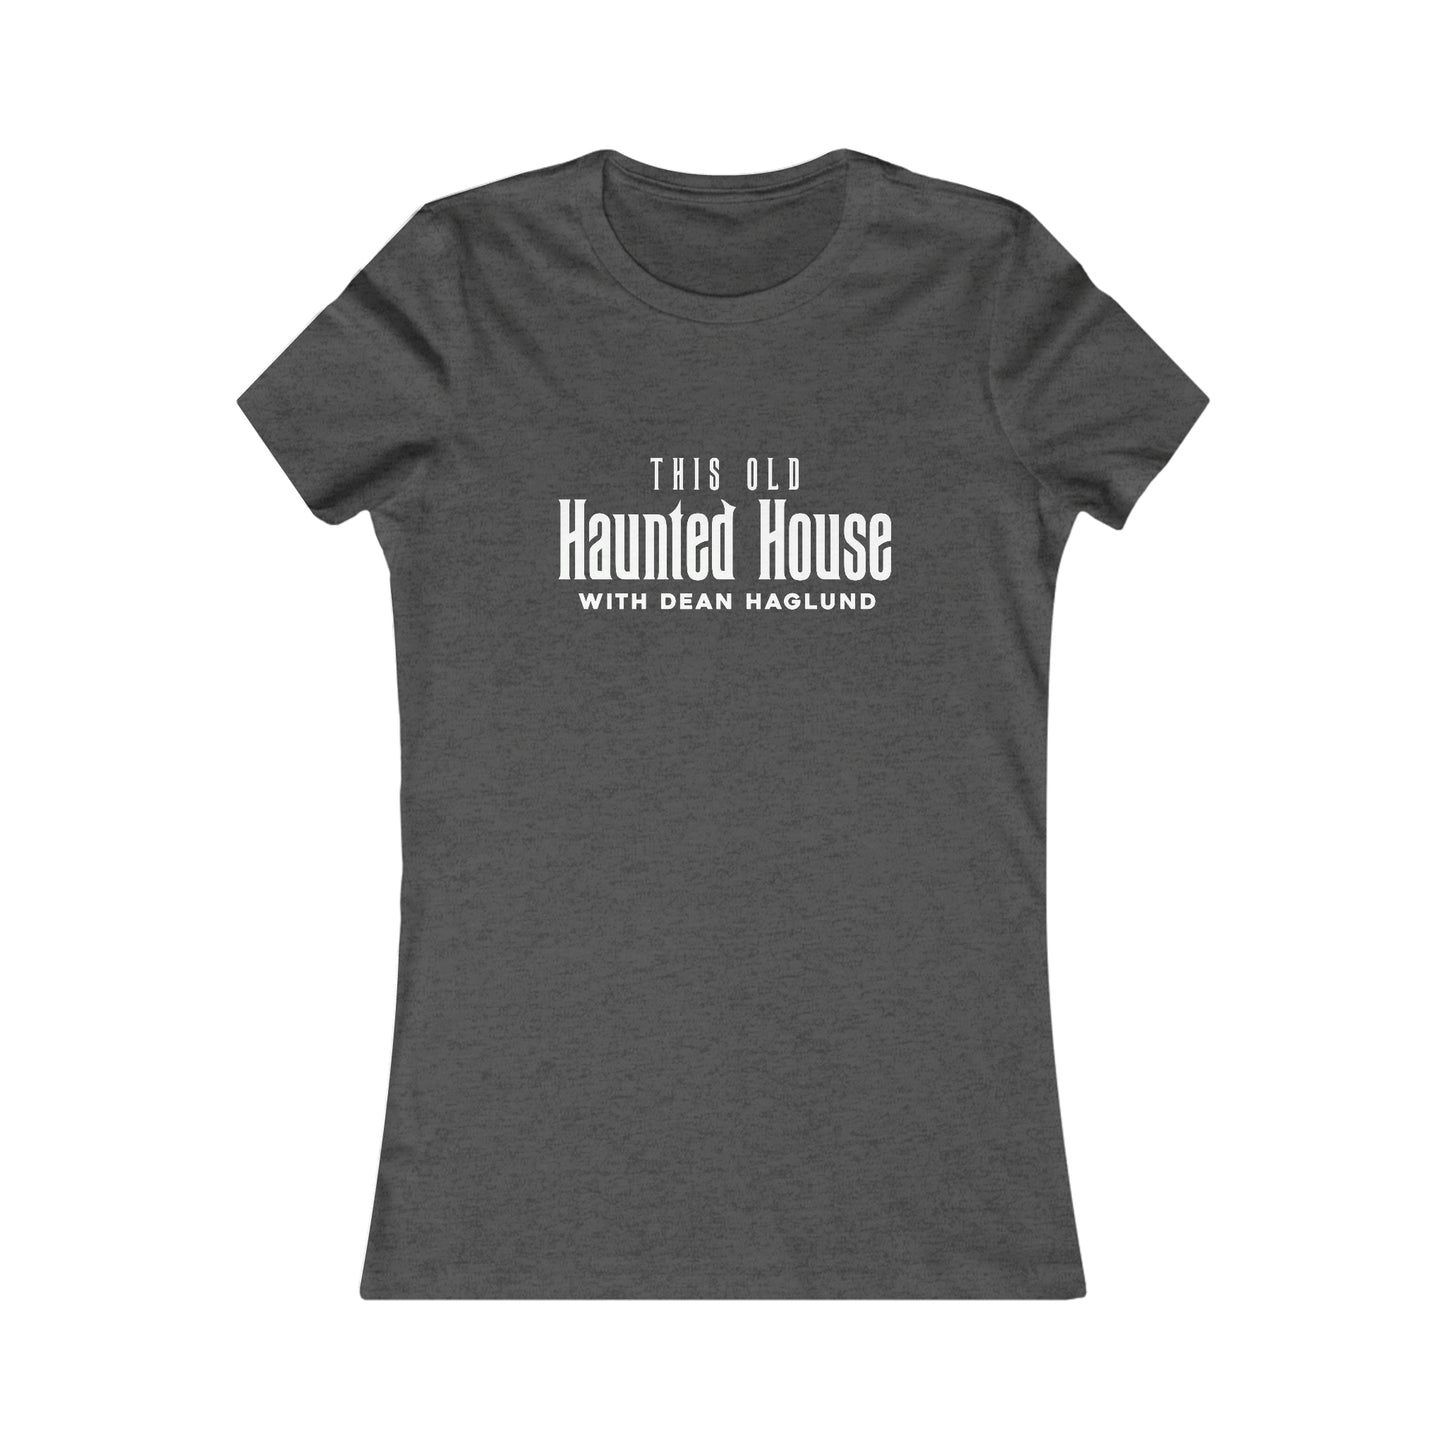 This Old Haunted House Women's Tee